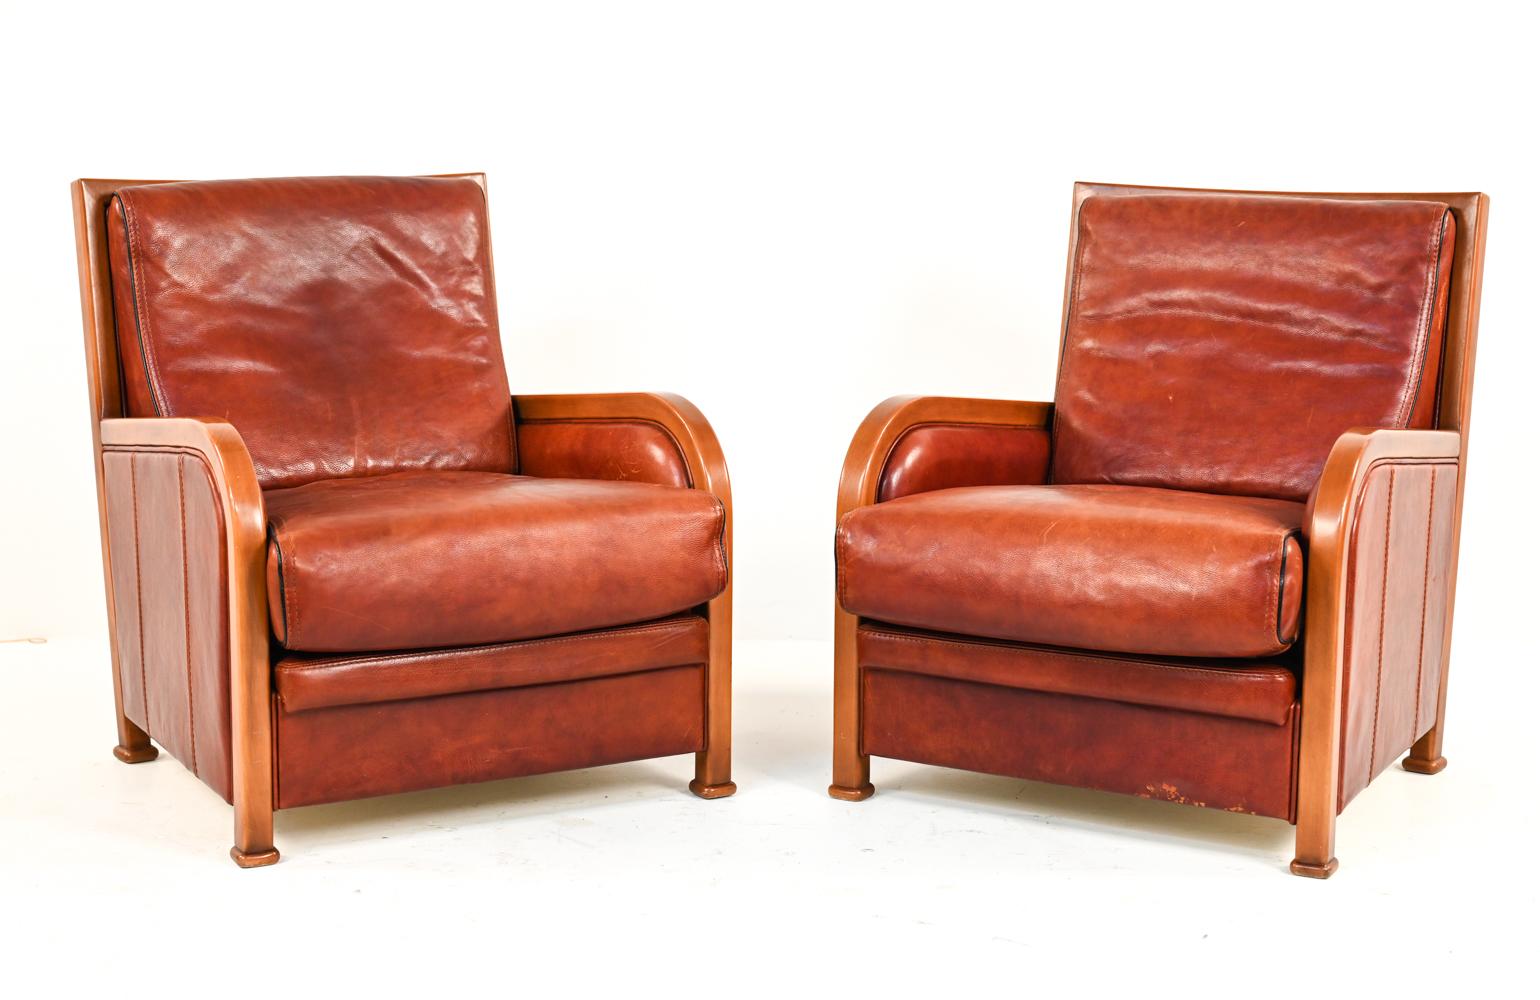 These rare Danish midcentury Anton Dam club chairs have a great Art Deco style. These chairs combine round and straight lines in an attractive way. With wooden frames and red leather upholstery, these chairs make an eye catching statement and will